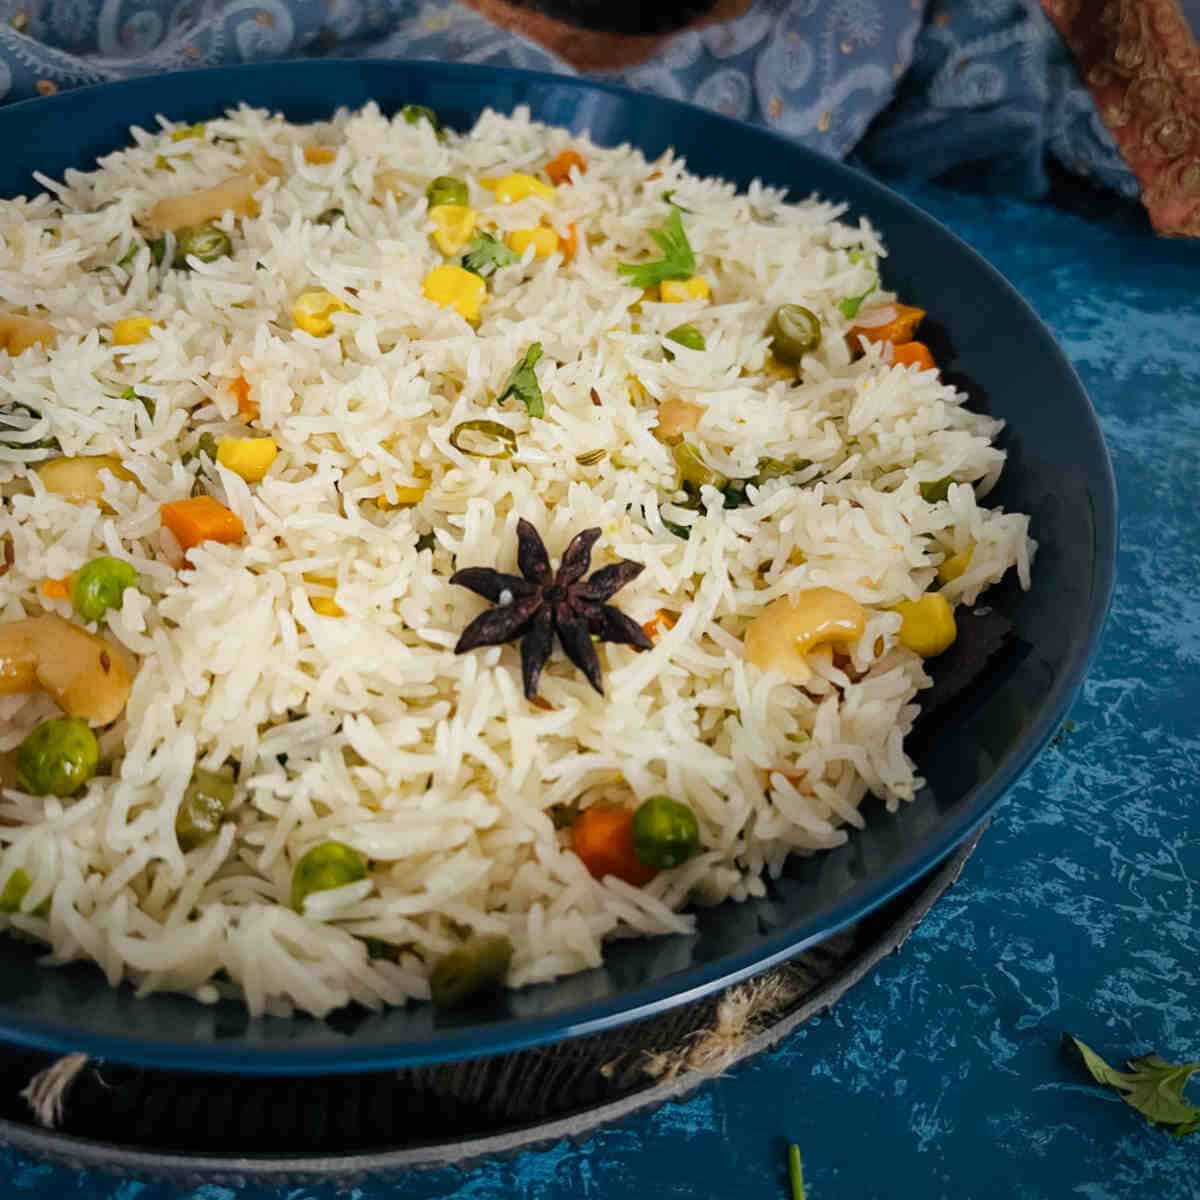 coconut rice with vegetables.